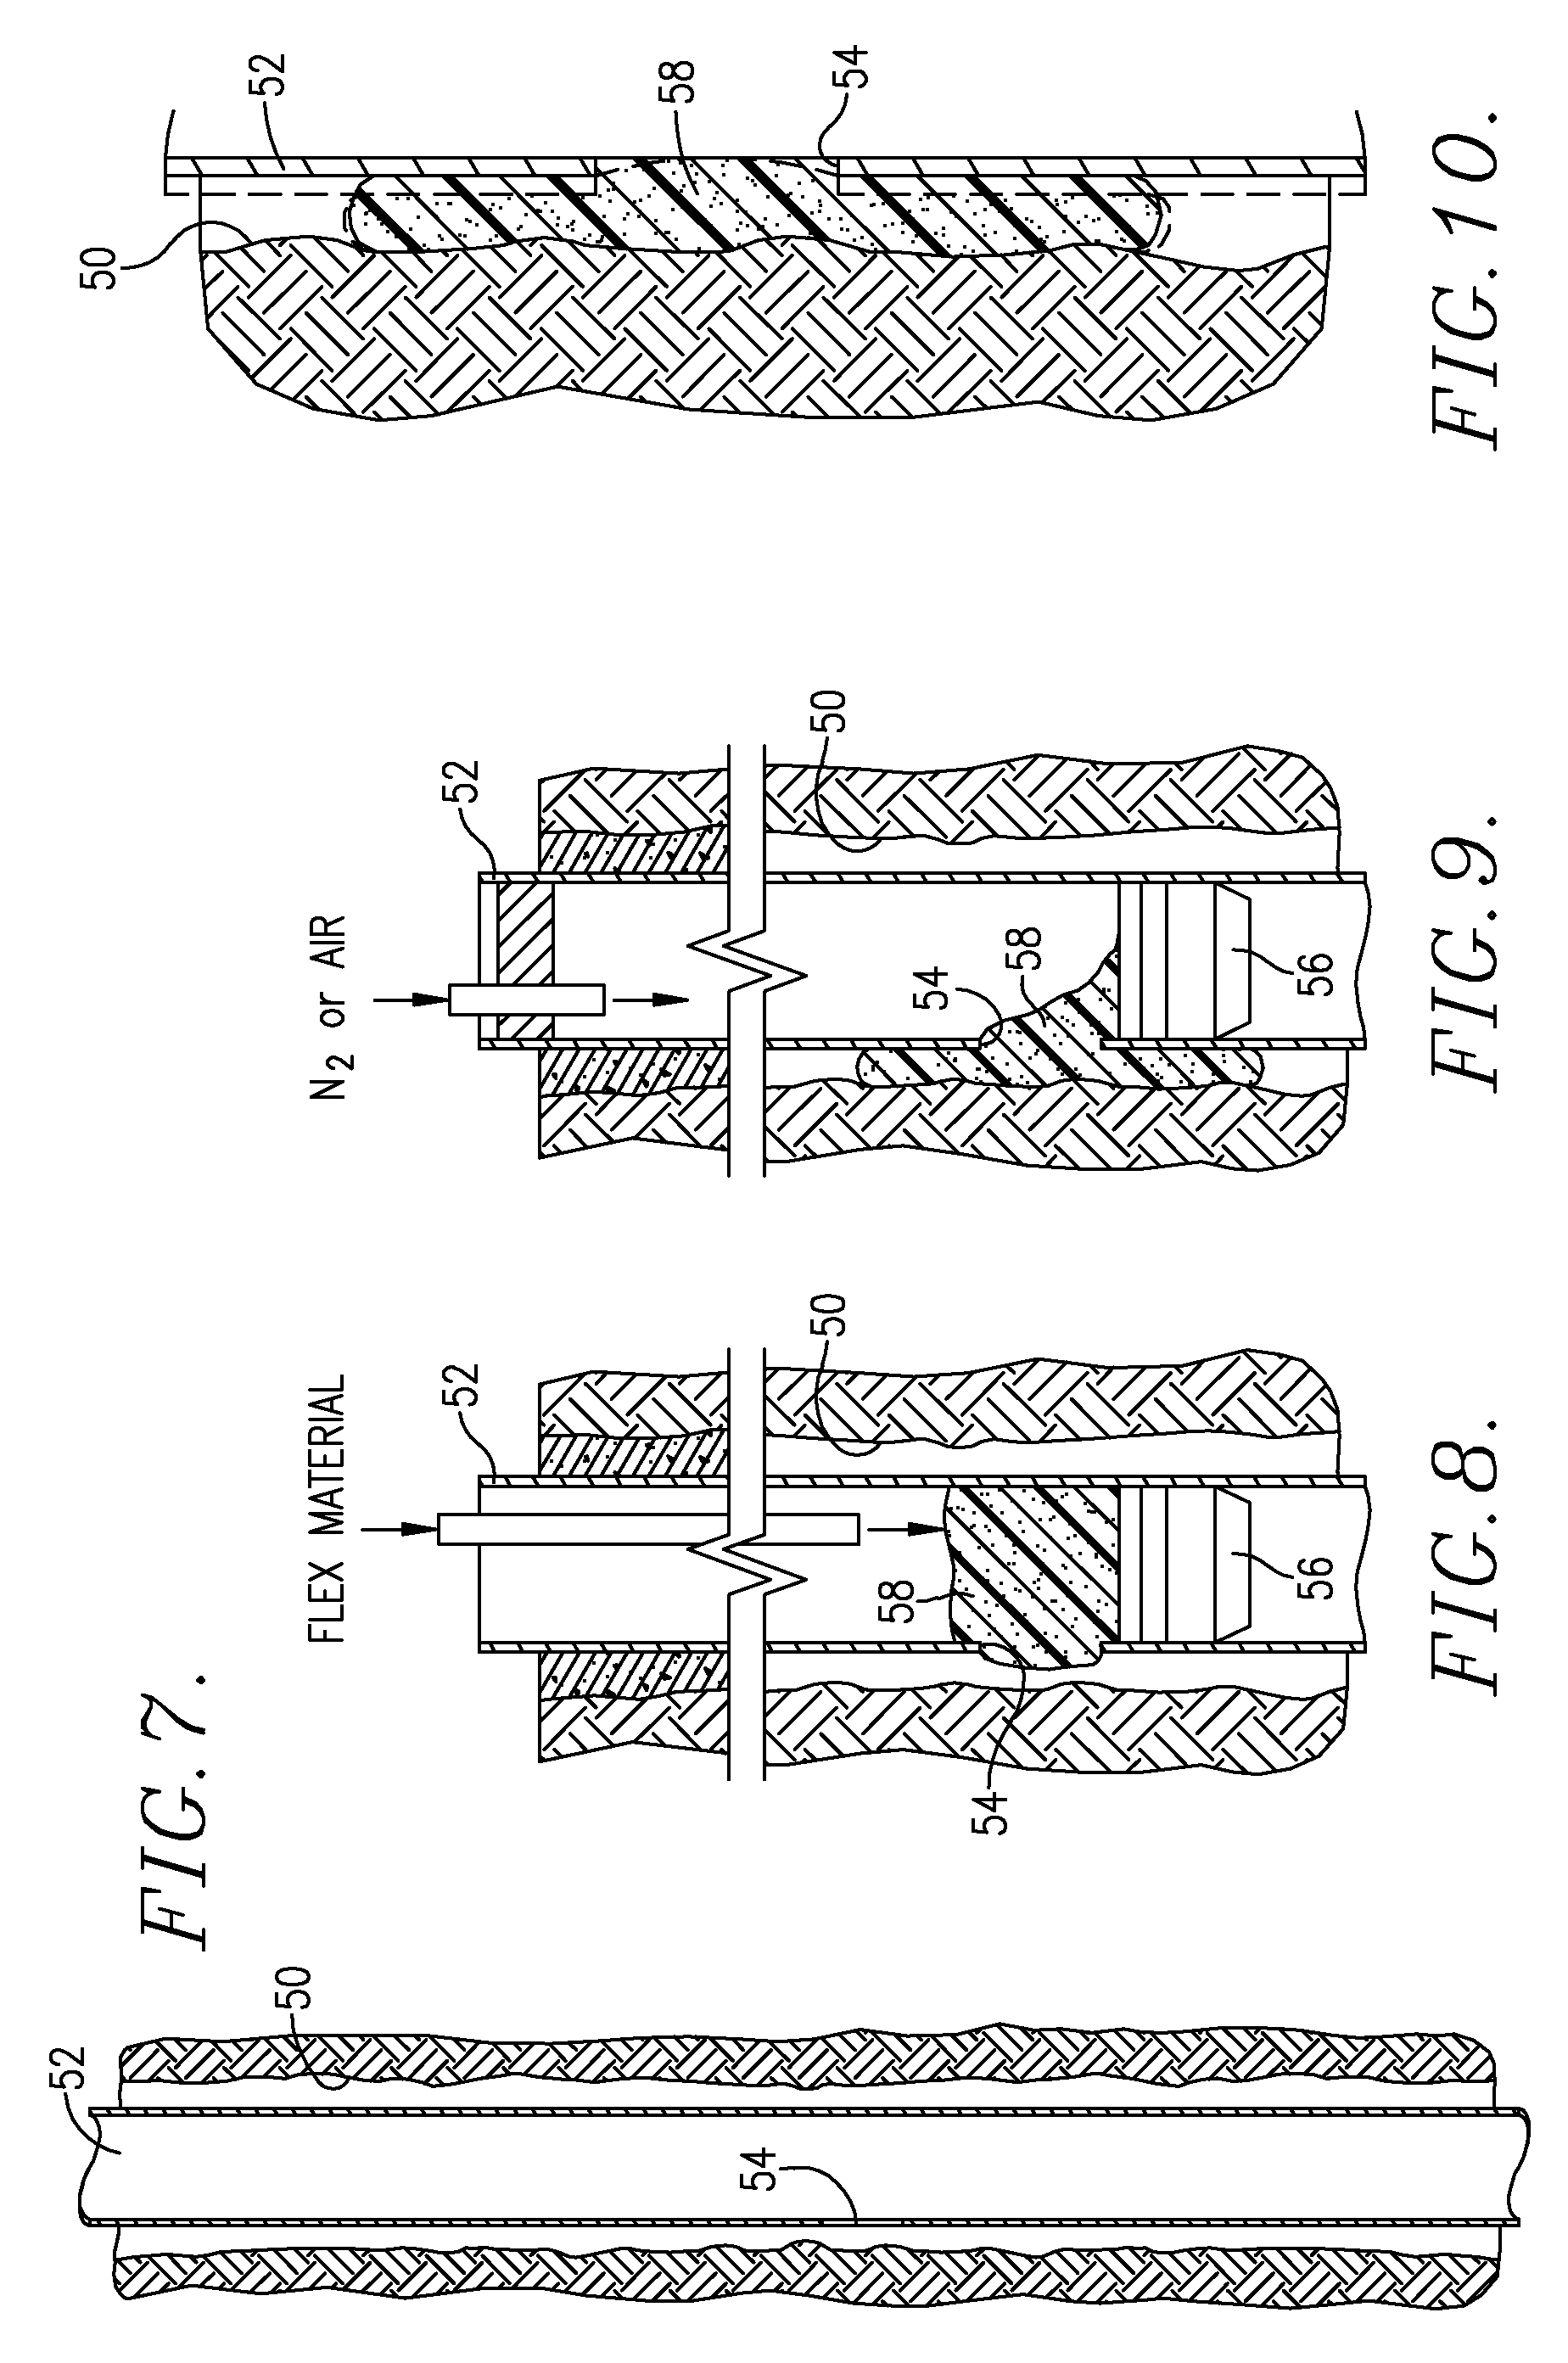 Modified epoxy-amine compositions for oil field uses